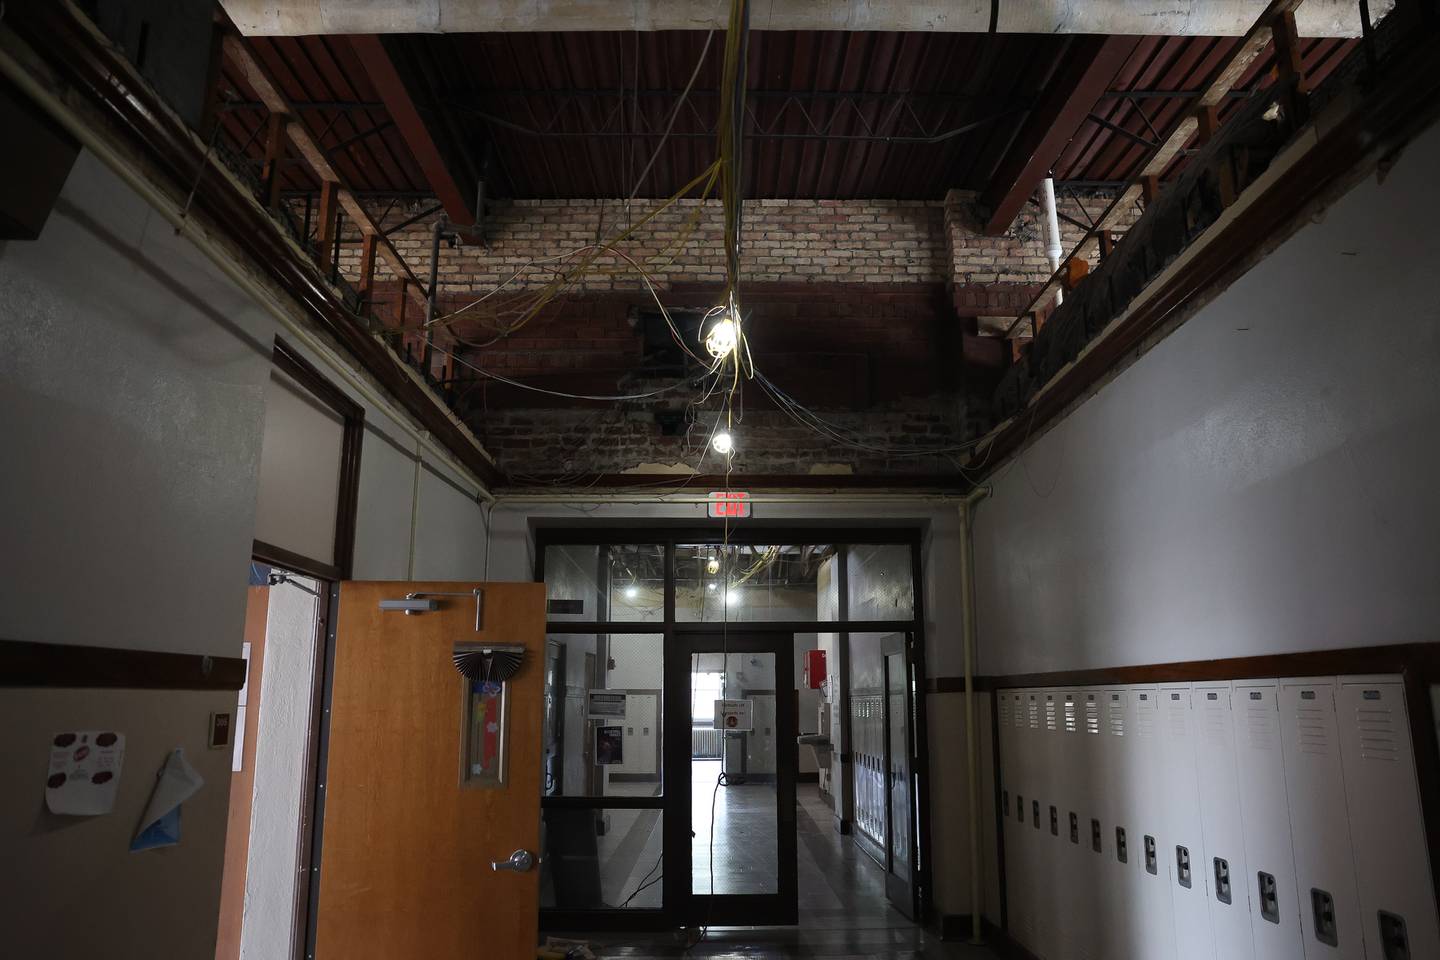 The wall of the original 1932 Lockport Township High School Central Campus building can be seen after crews took down sections of the ceiling in the 1952 addition.